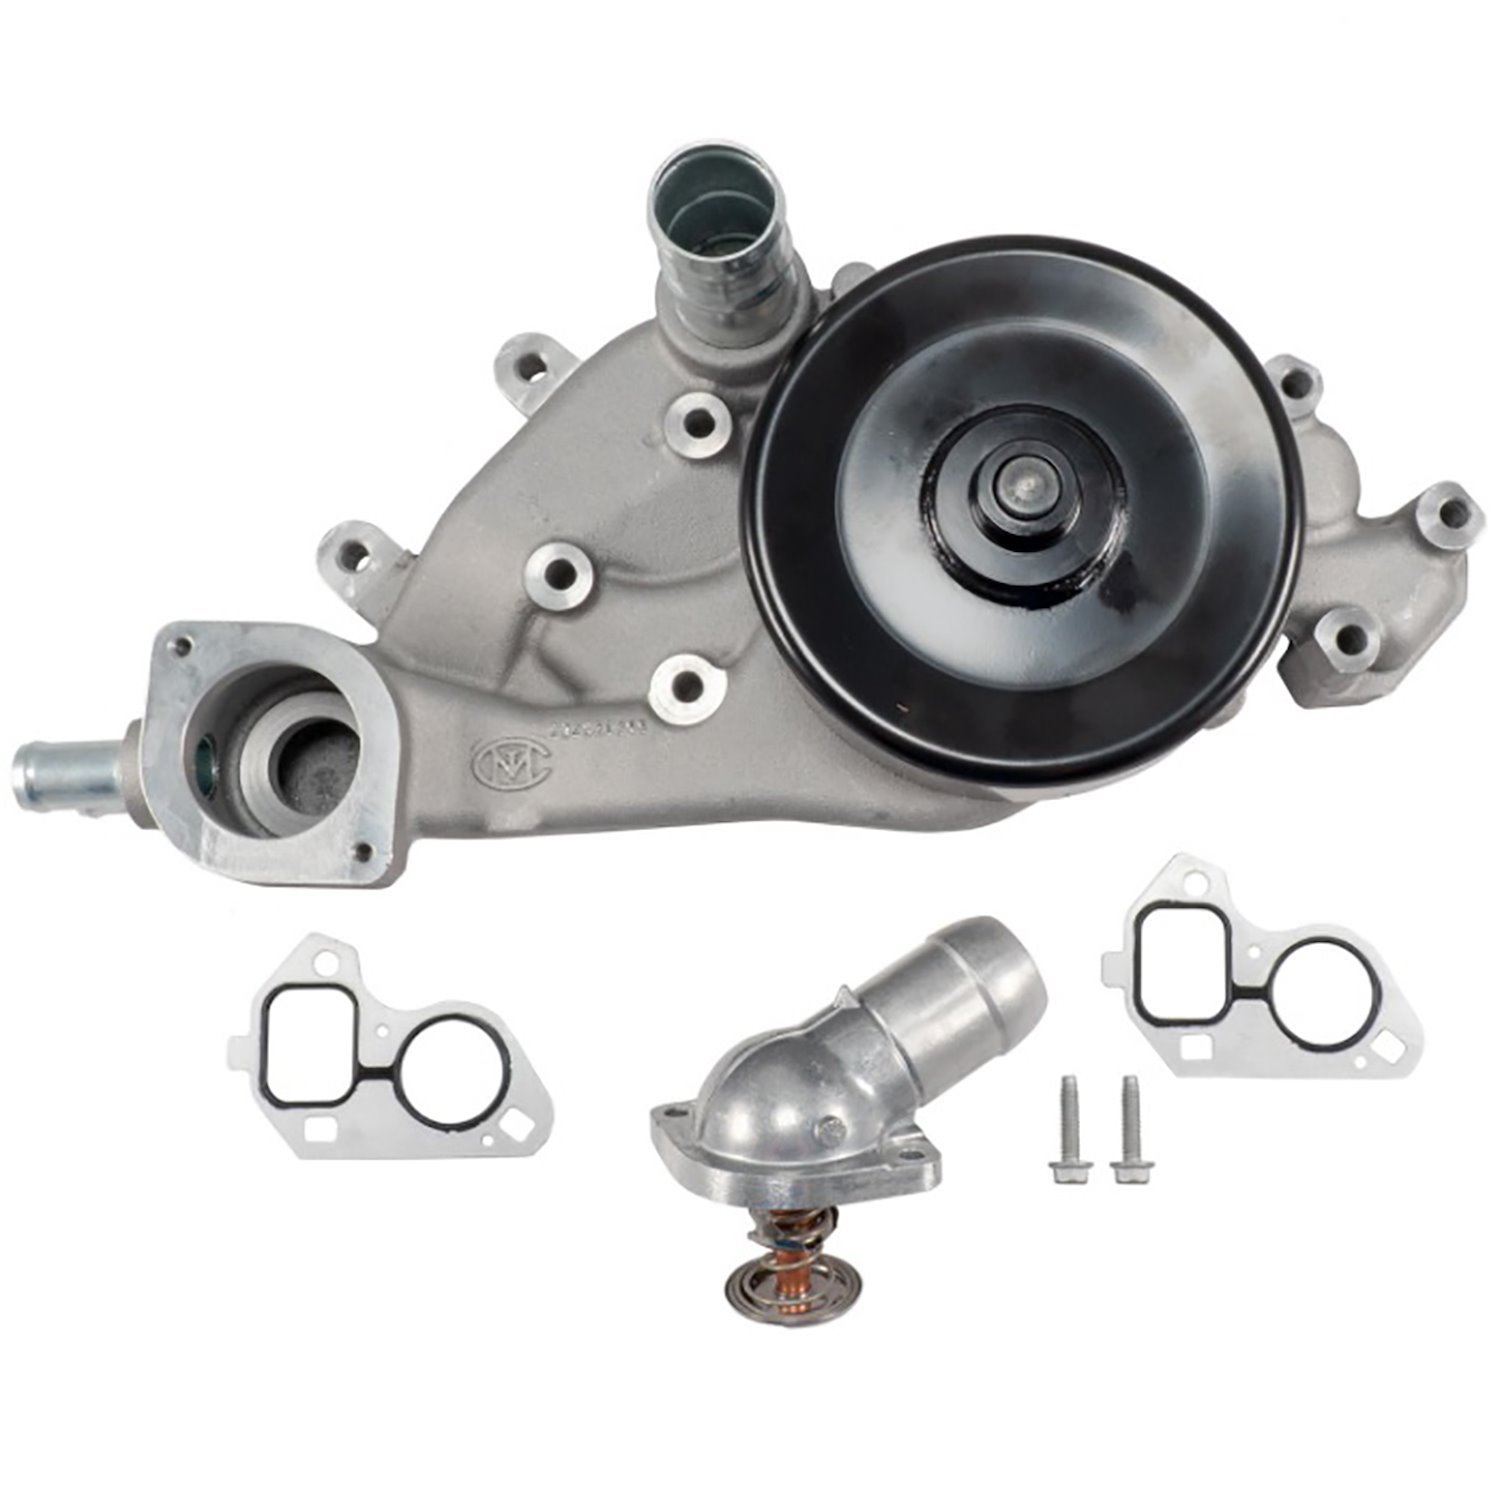 Water Pump with Thermostat 2004-2009 GM CTS, Corvette, G8 LS 5.7/6.0/6.2/7.0L V8 Engines